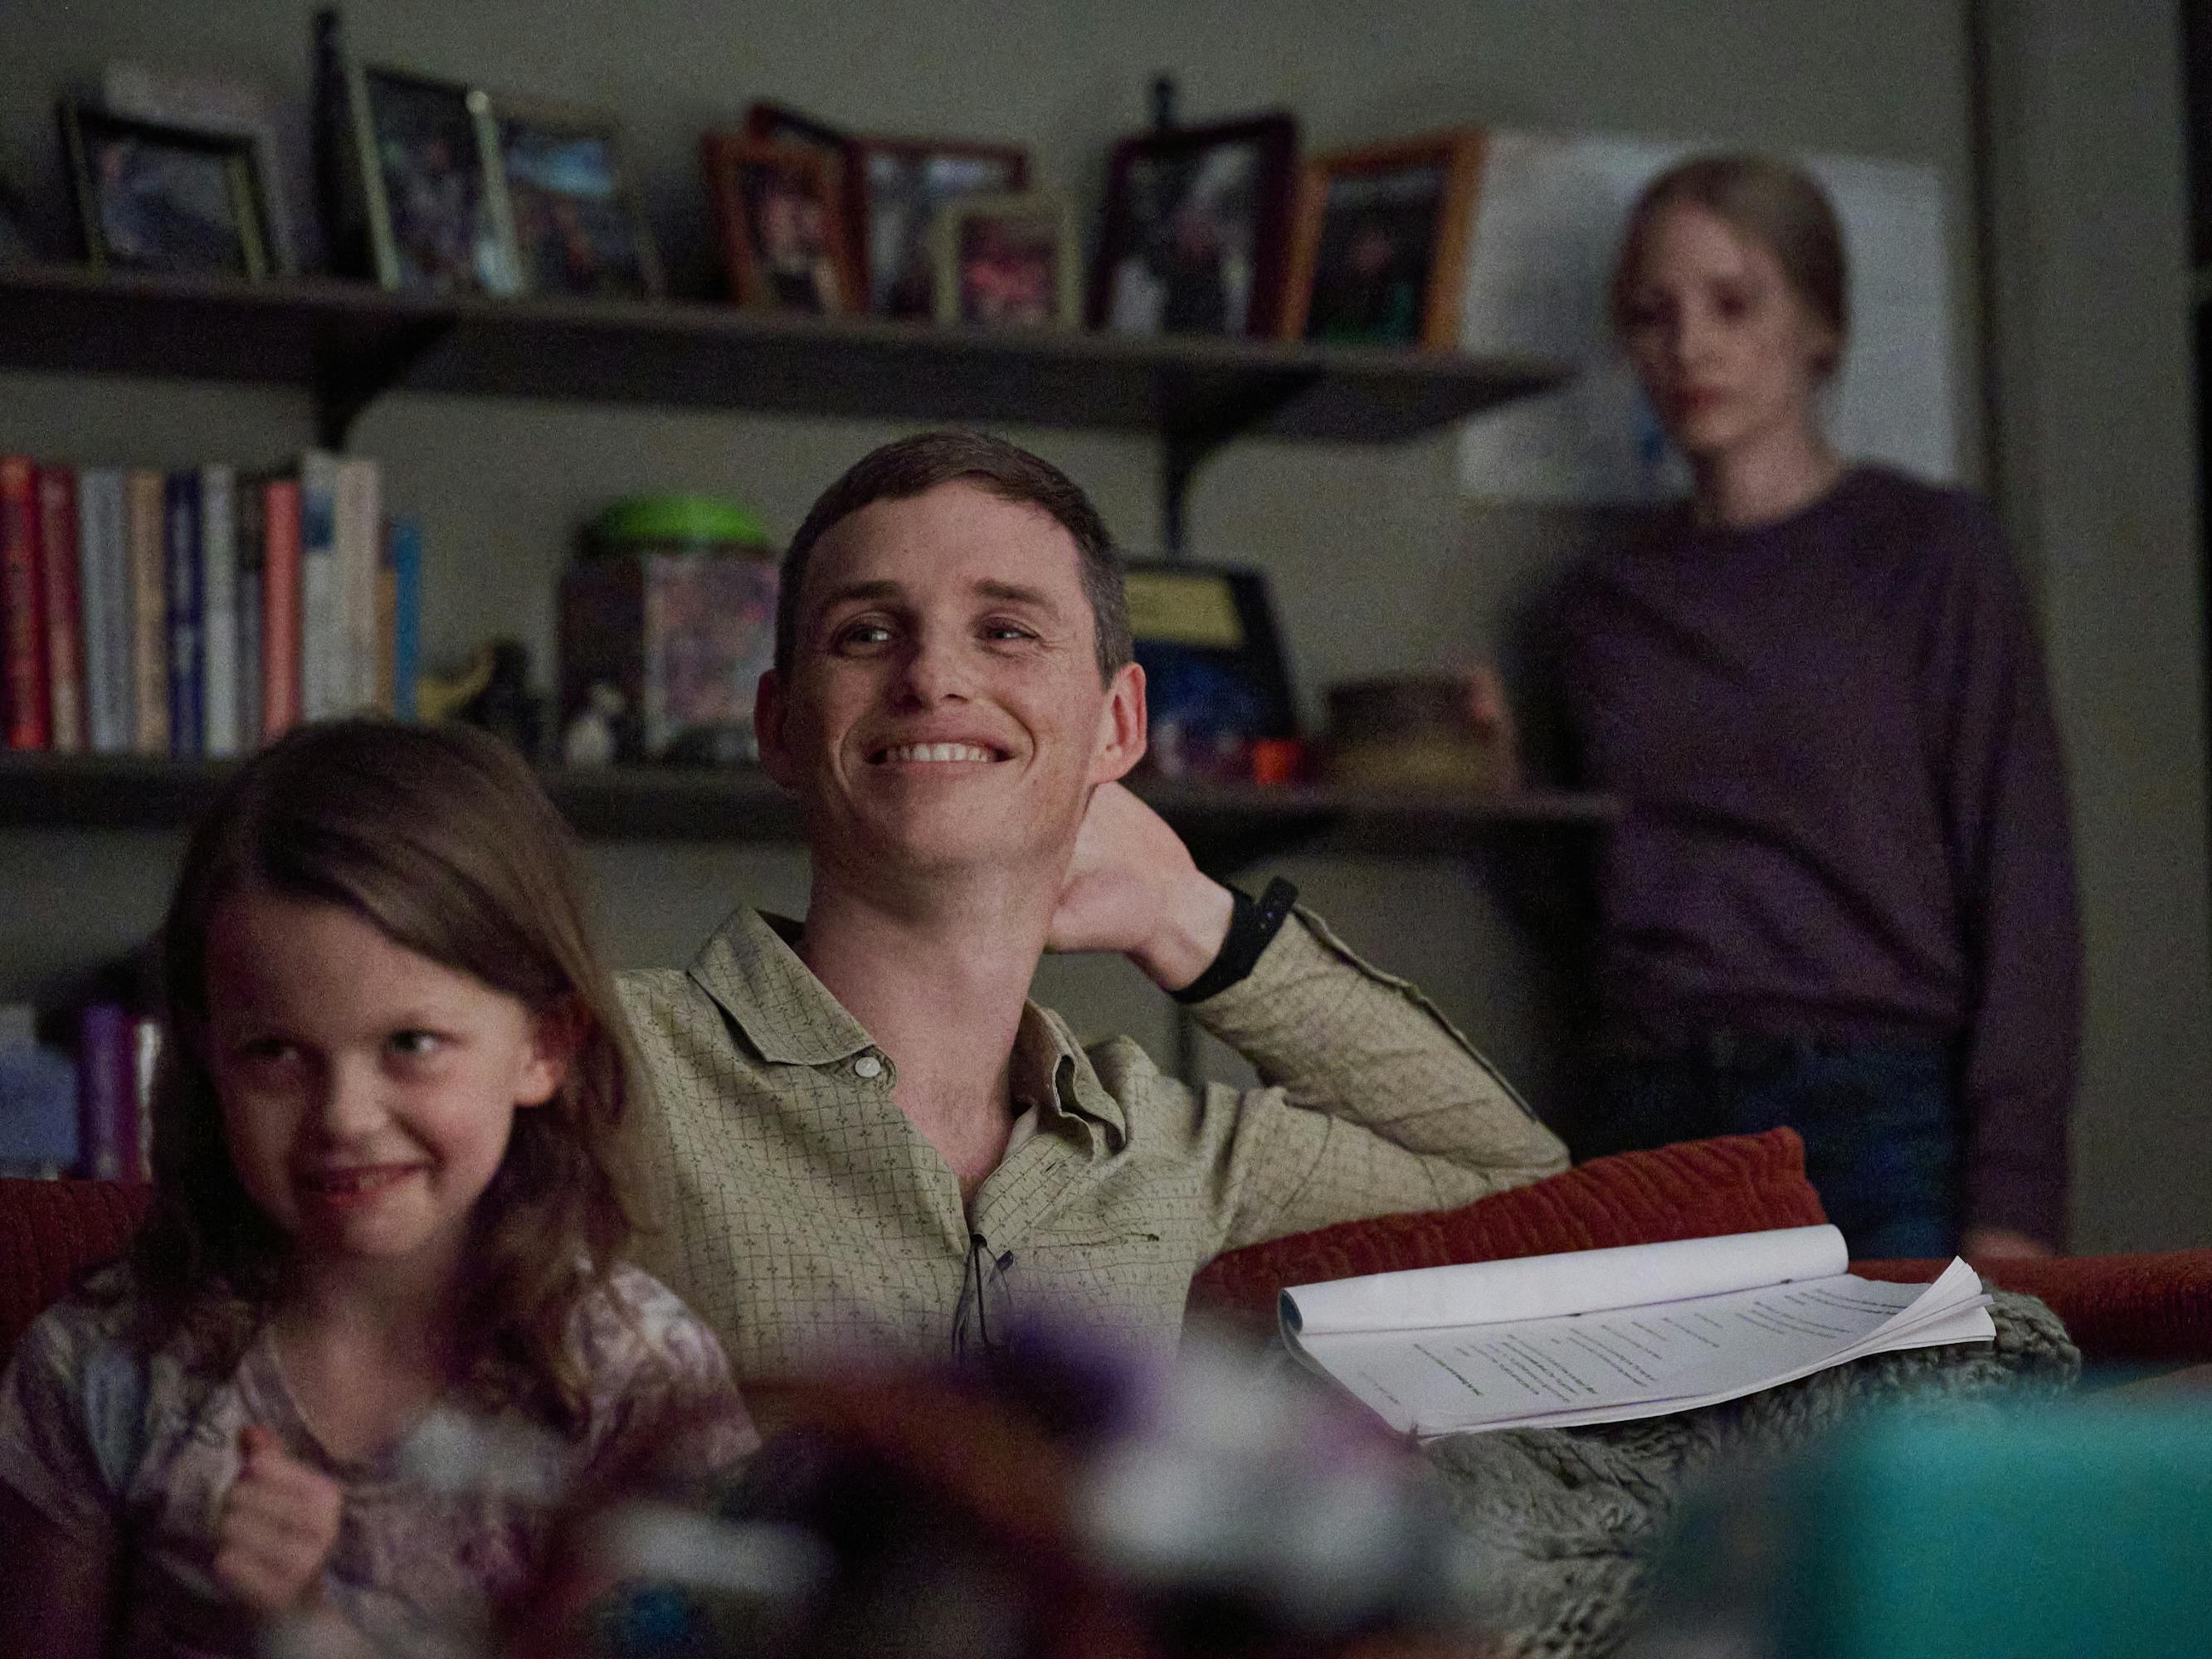 Maya Loughren (Devyn McDowell), Charles Cullen (Eddie Redmayne), and Amy Loughren (Jessica Chastain) sit together in a living room. On the wall are hanging shelves with books.